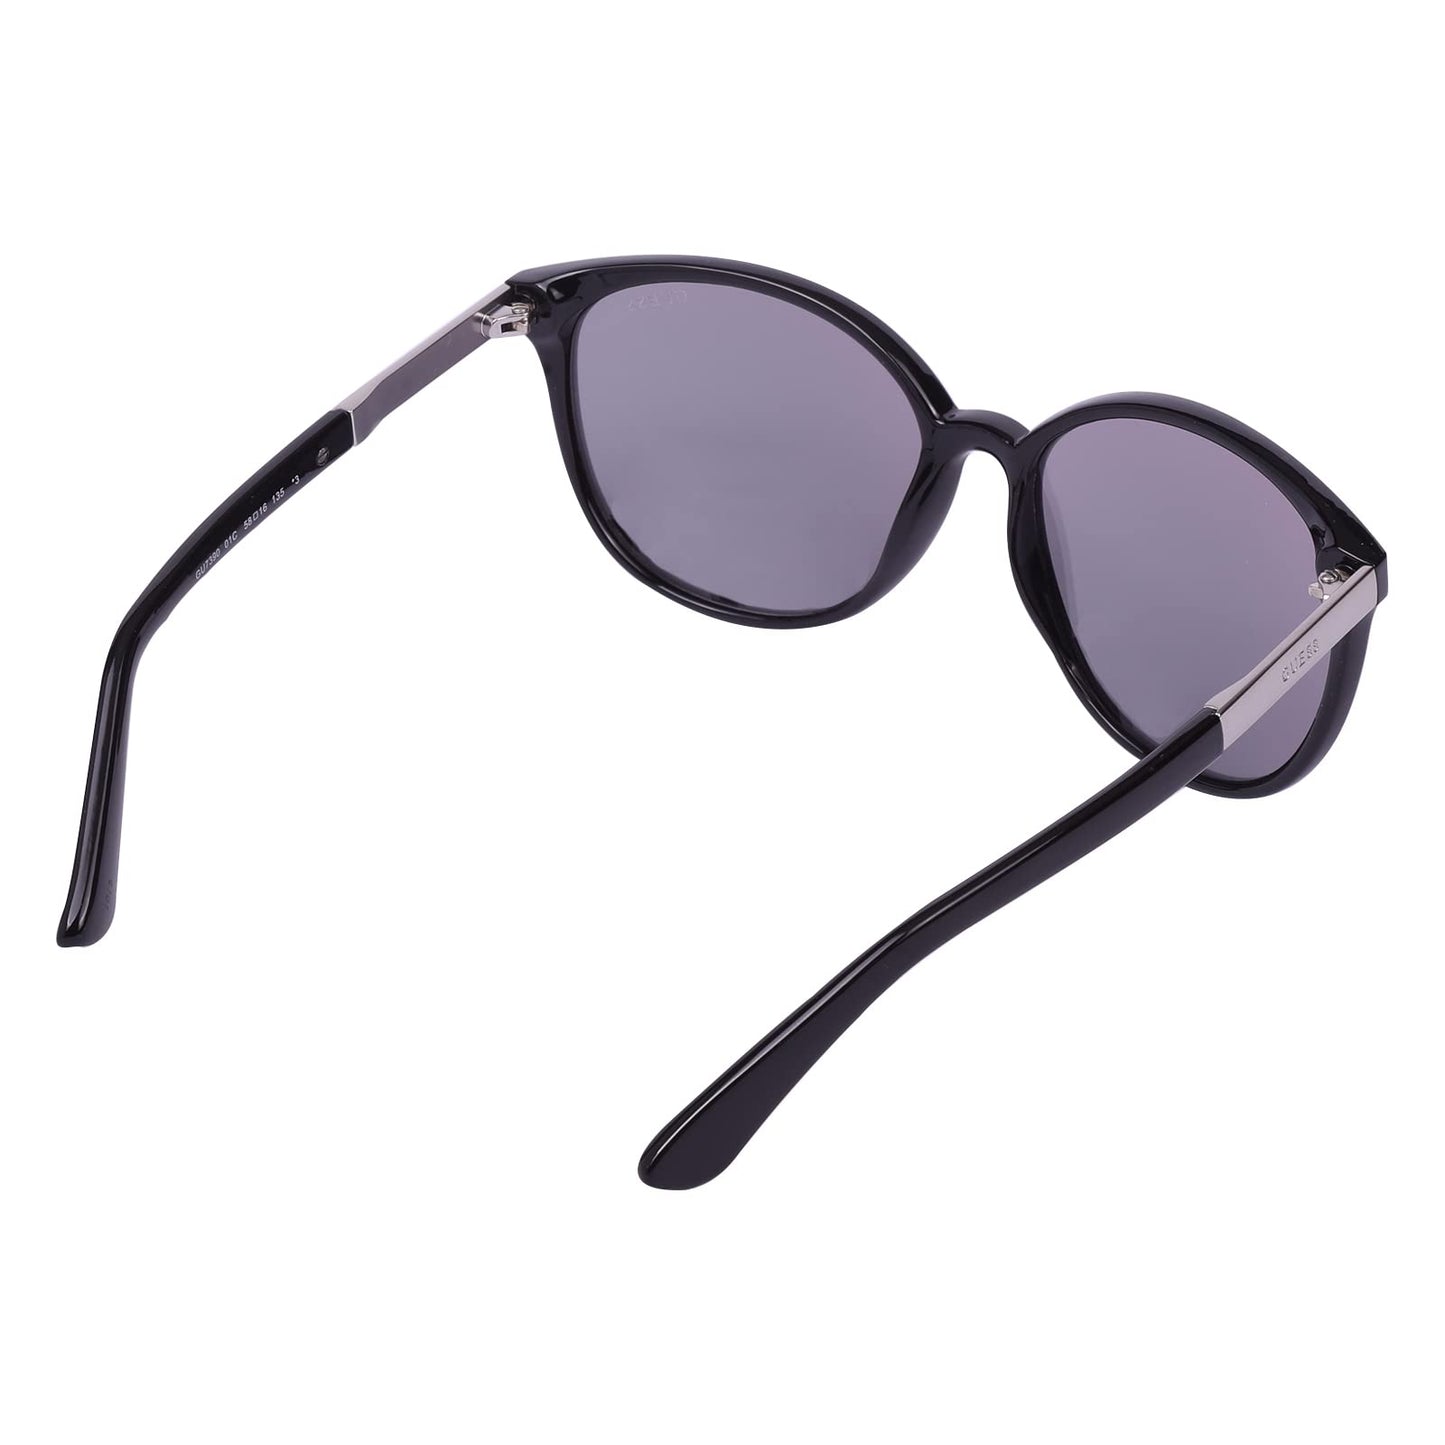 GUESS Mirrored Cat Eye Women's Sunglasses 7390 01C|58|Silver Color Lens